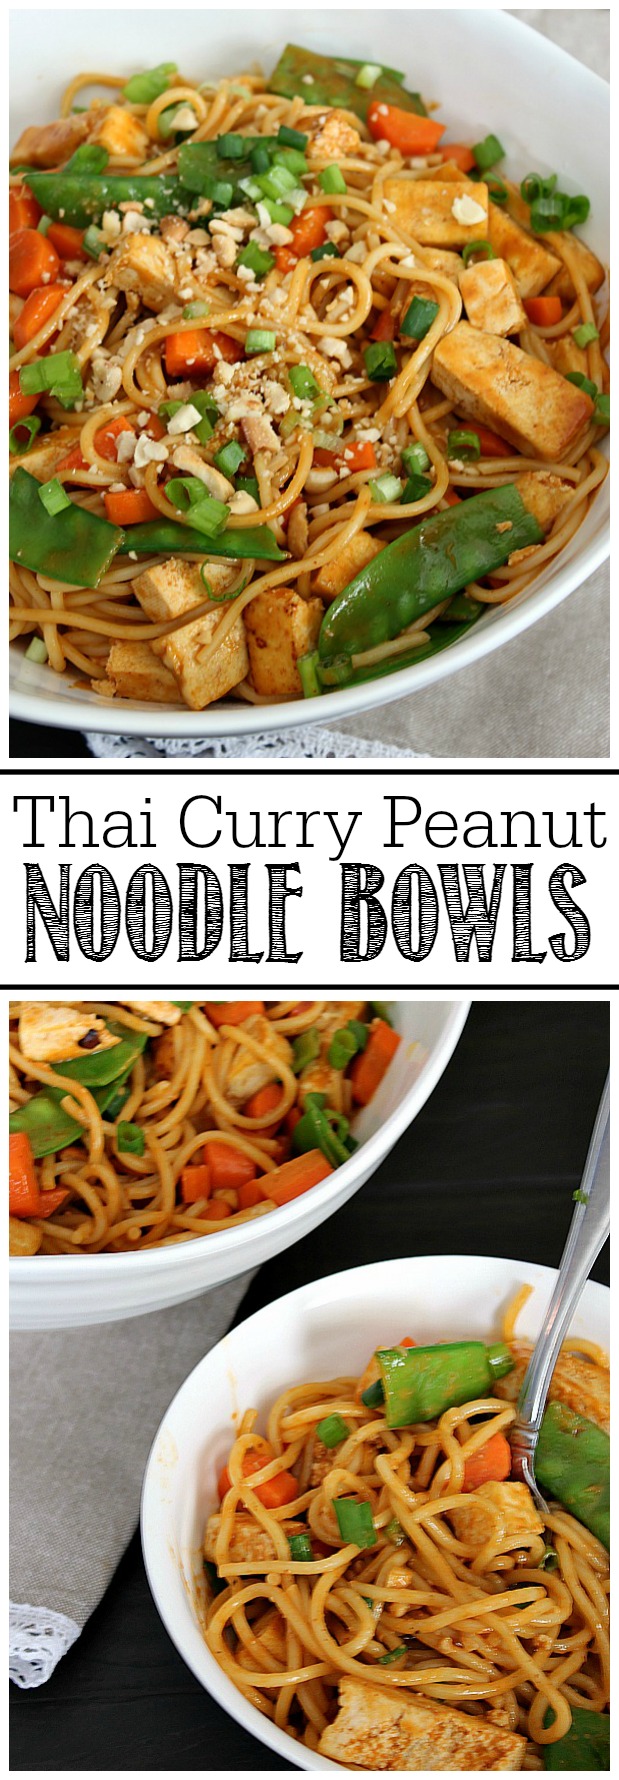 Delicious Thai curry peanut noodles - can add tofu for a vegetarian option or chicken. Such a quick and easy dinner idea in less than 30 minutes!